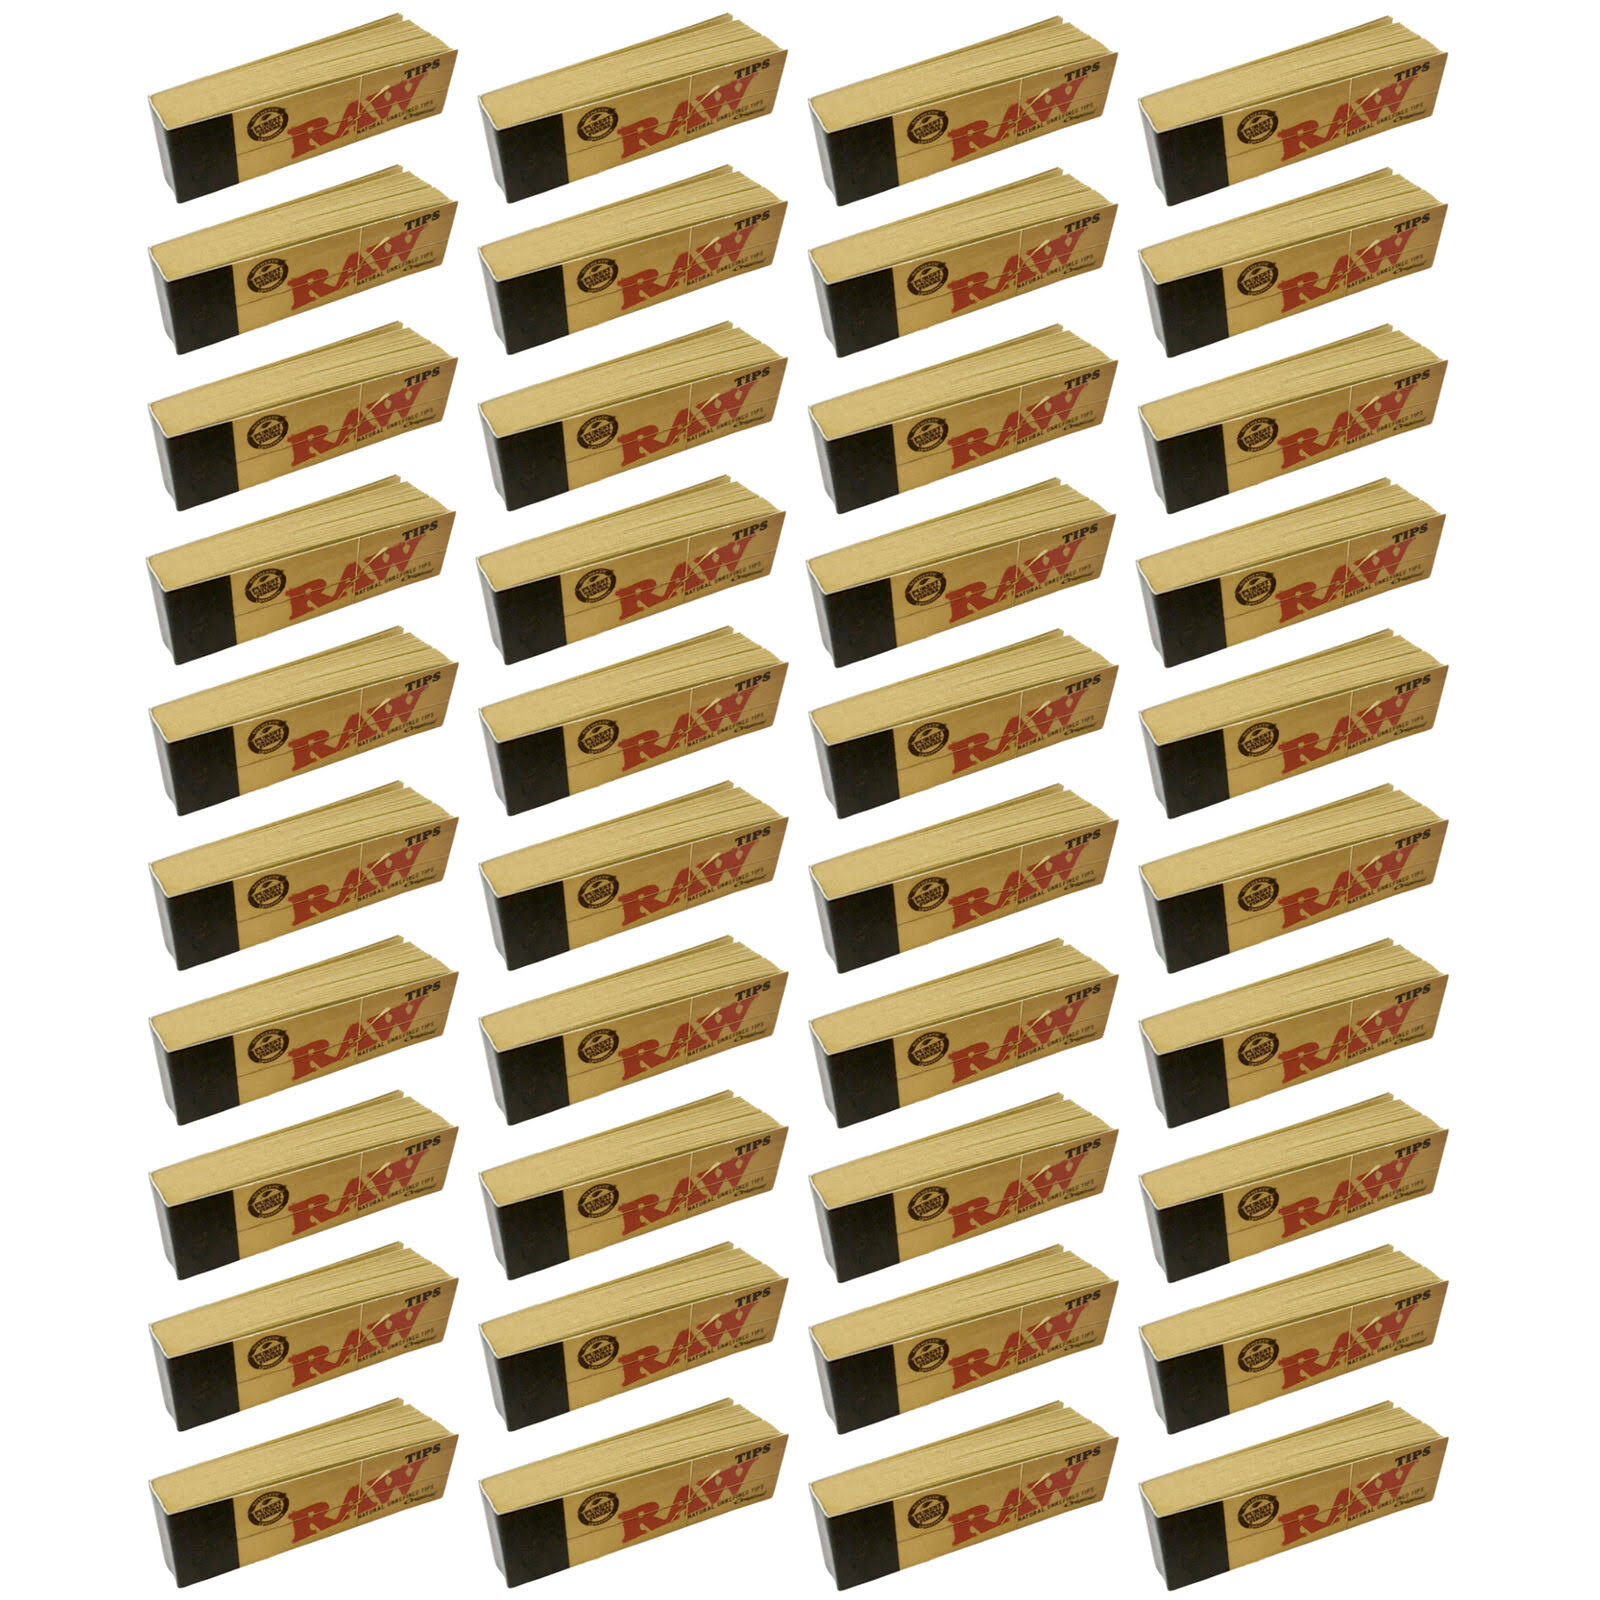 Raw Natural Rolling Paper Tips - 100pcs